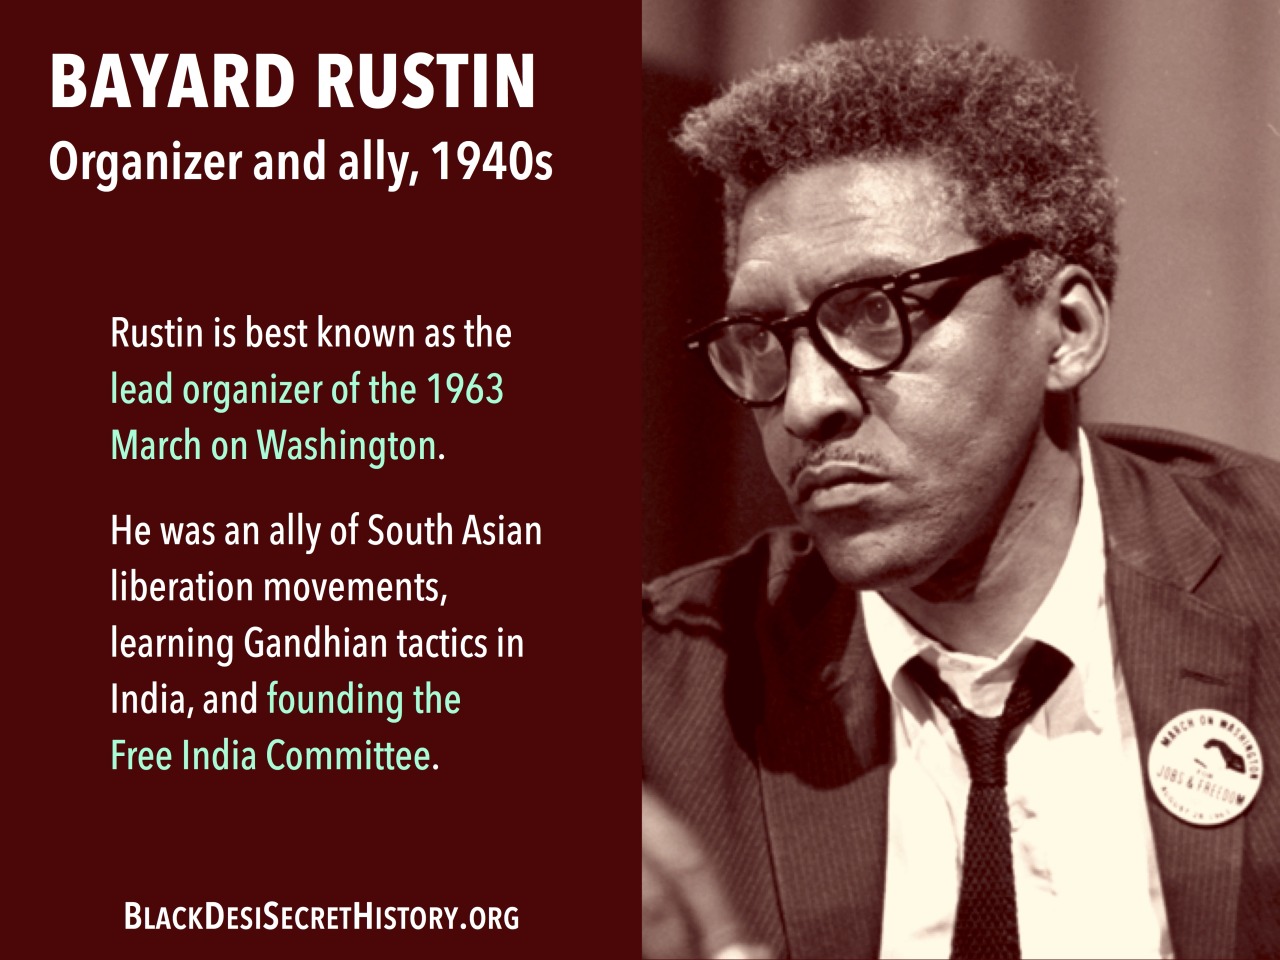 BAYARD RUSTIN, Organizer and ally, 1940s: Rustin is best known as the lead organizer of the 1963 March on Washington. He was also an ally of South Asian liberation movements, repeatedly getting arrested while protesting British colonization of India.